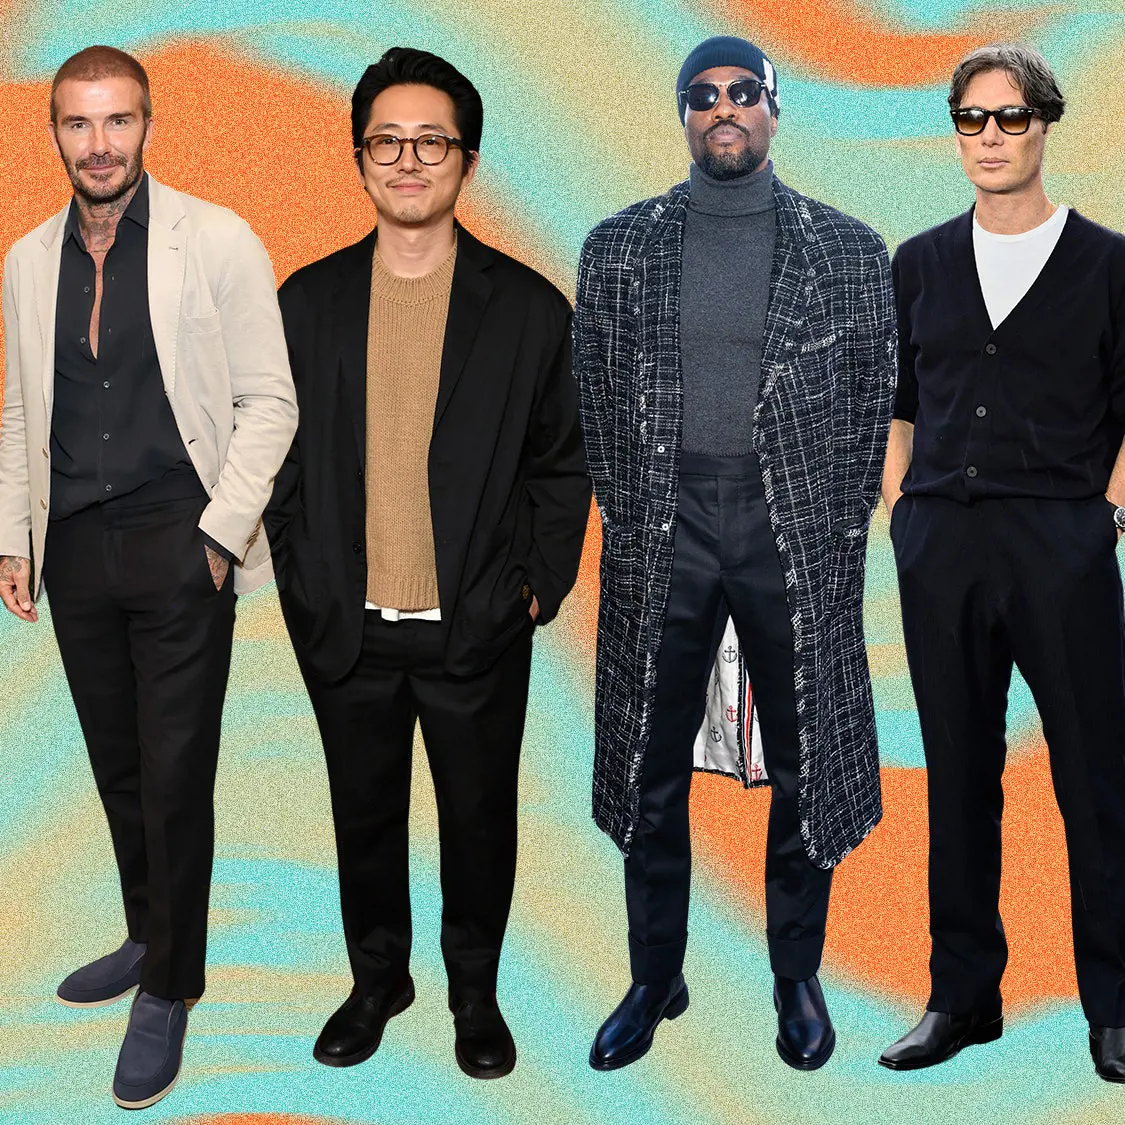 Decoding The Gq Dress Code: What Does It Really Mean? | ShunVogue